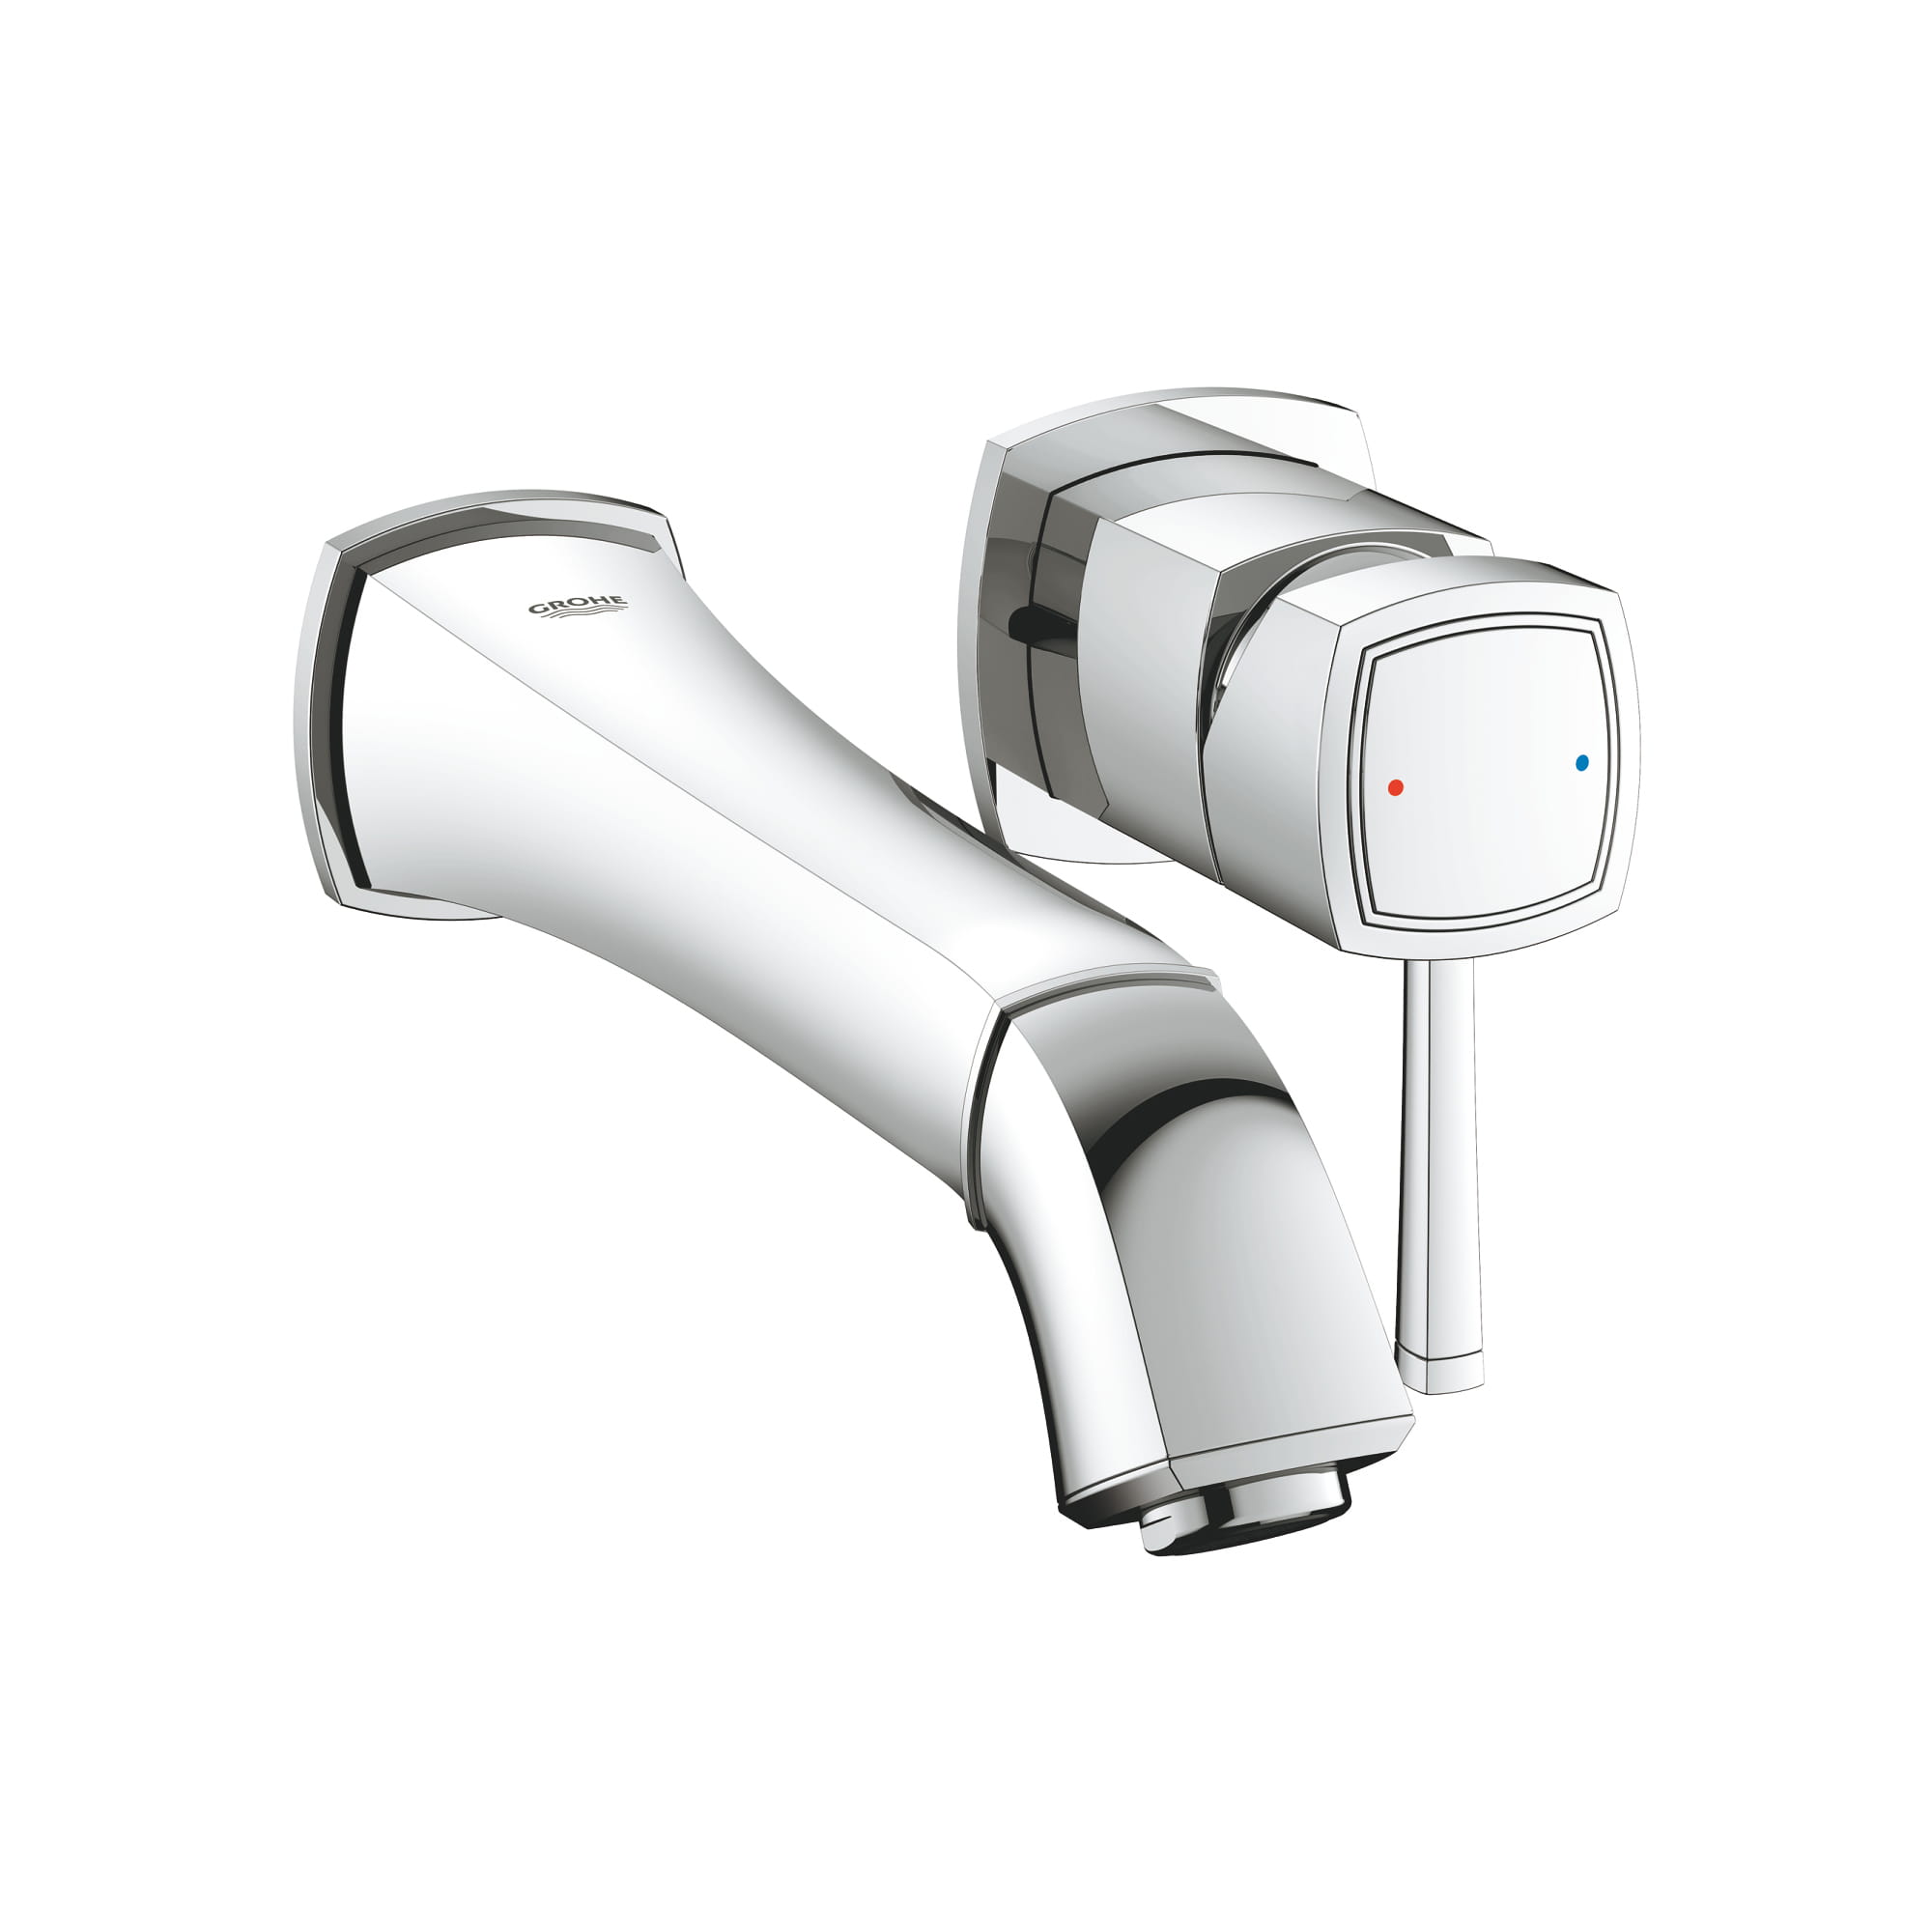 2-HANDLE WALL MOUNT FAUCET 1.2 GPM-related